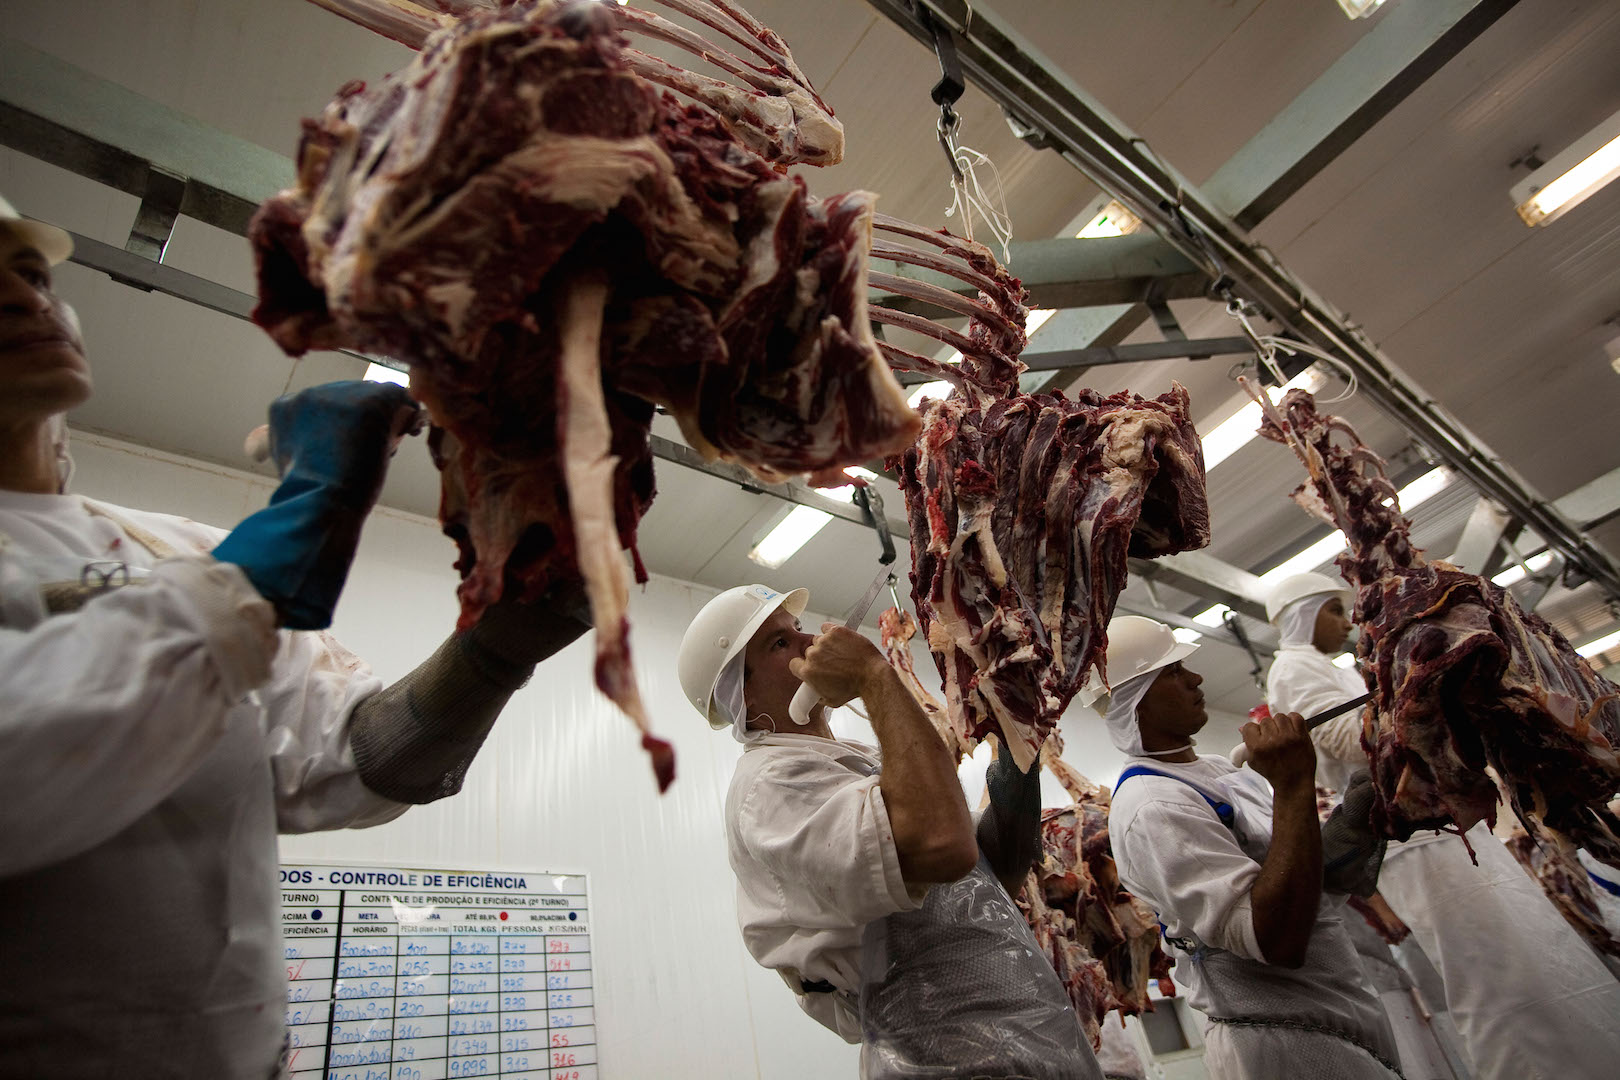 men working at a slaughterhouse in Mato Grosso state, Brazil